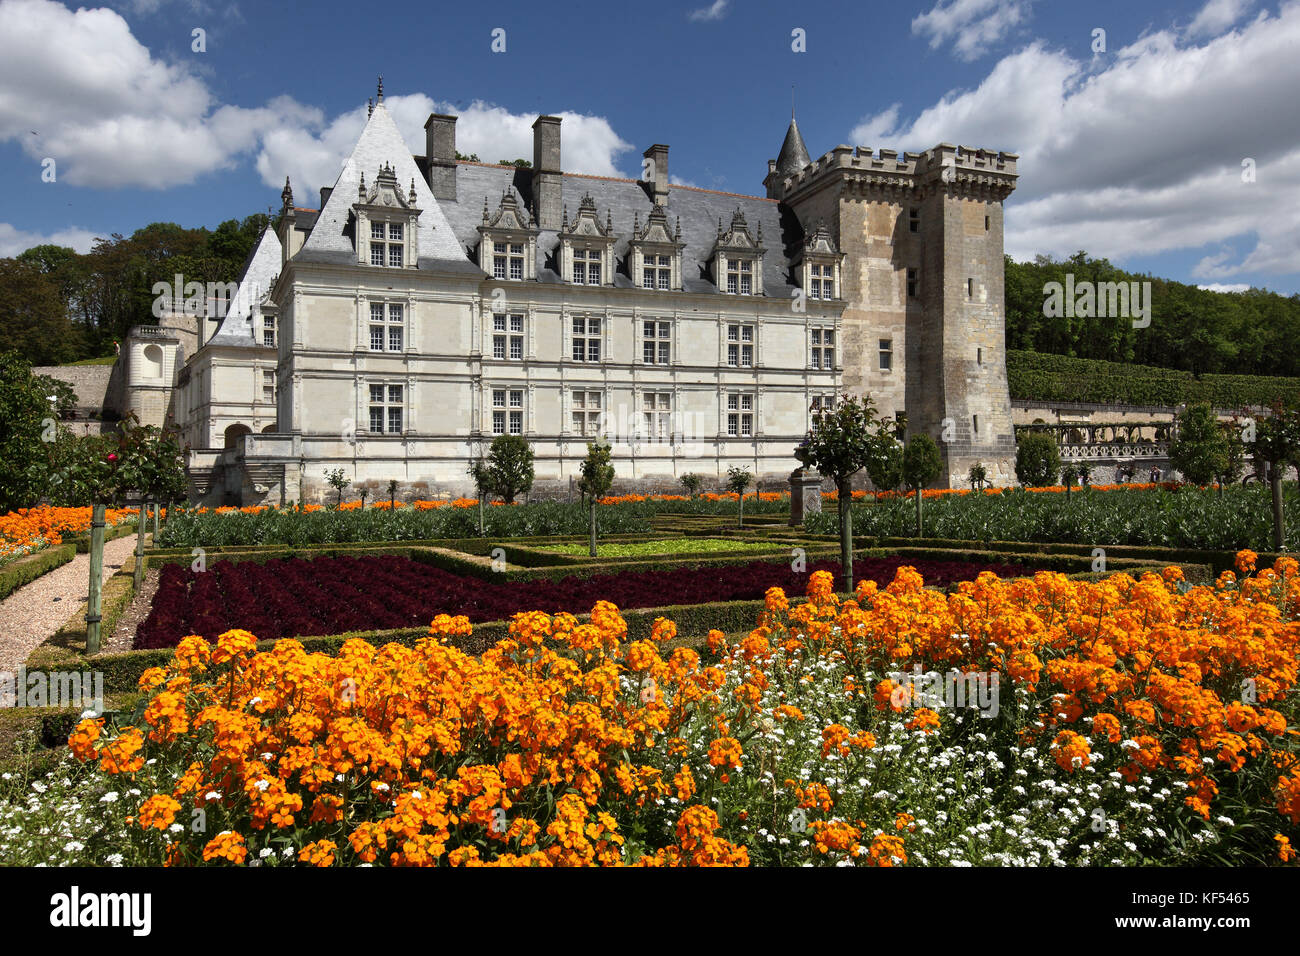 France, Center France, Touraine, Chateau de Villandry and its vegetable garden, with square flower gardens. Occidental facade and blue sky. Stock Photo